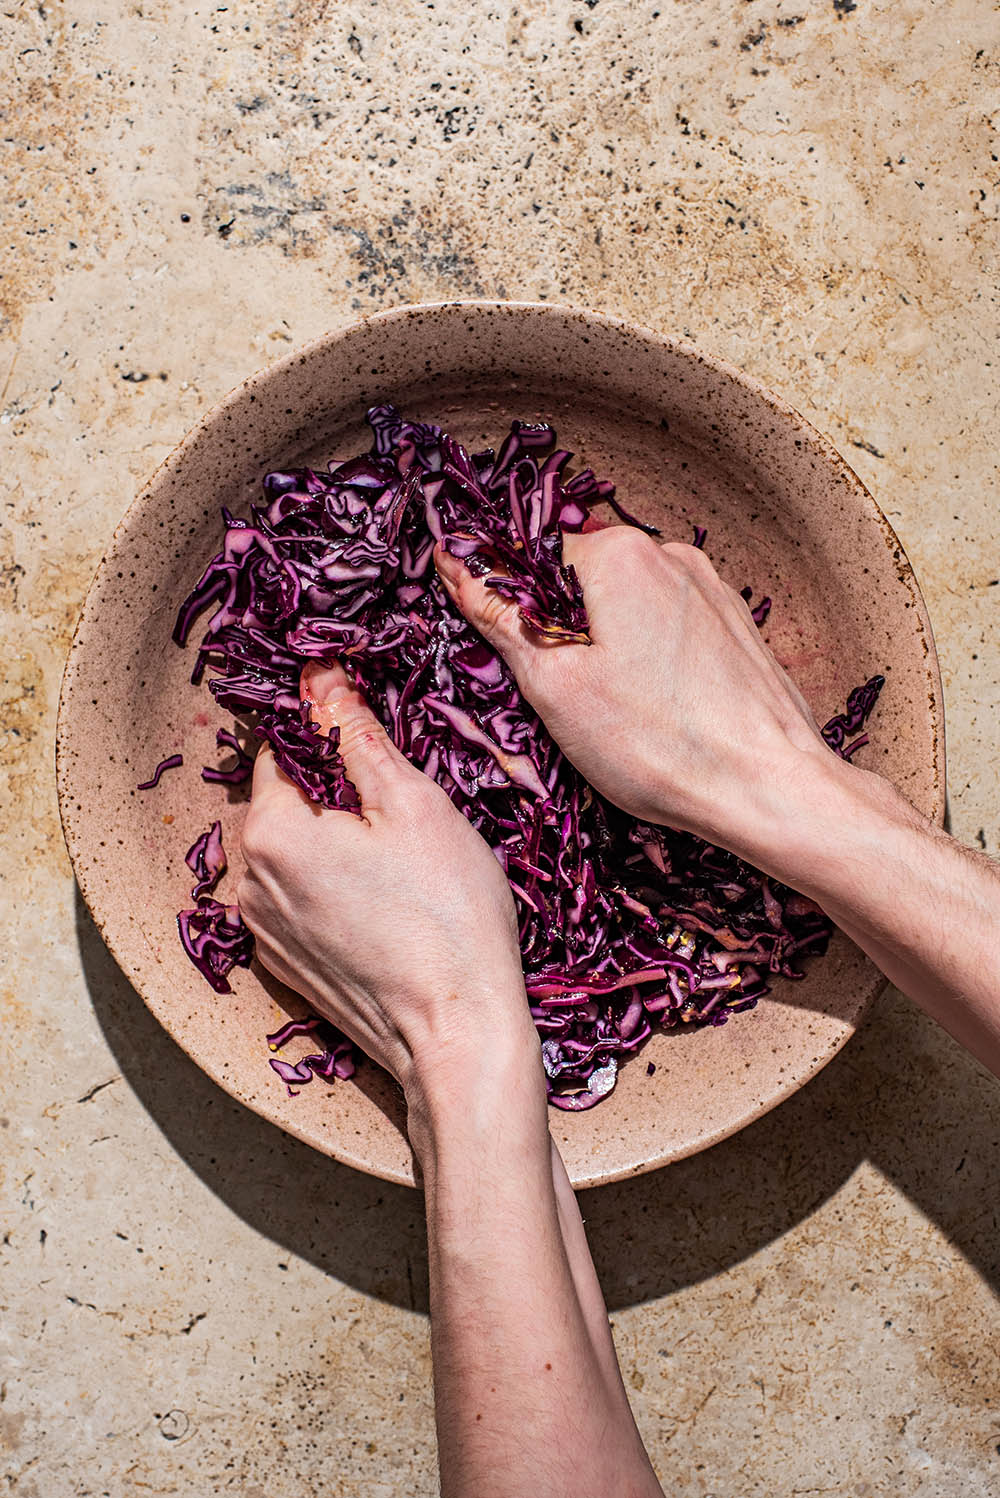 Woman's hands massaging the cabbage in a bowl.